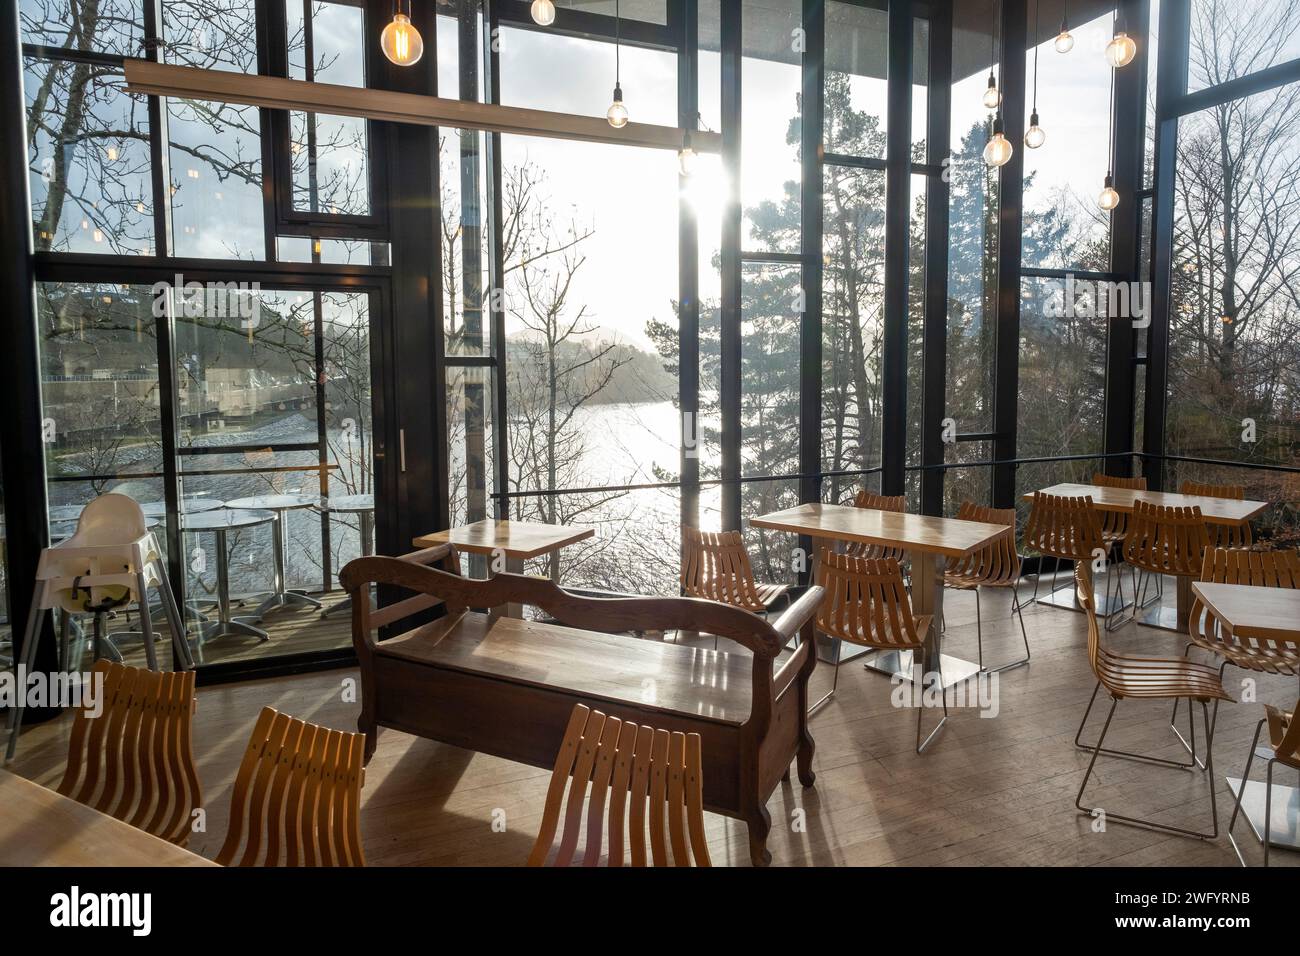 Cafe at Troldhaugen, home of the Norwegian composer Edvard Grieg in Bergen, Norway Stock Photo